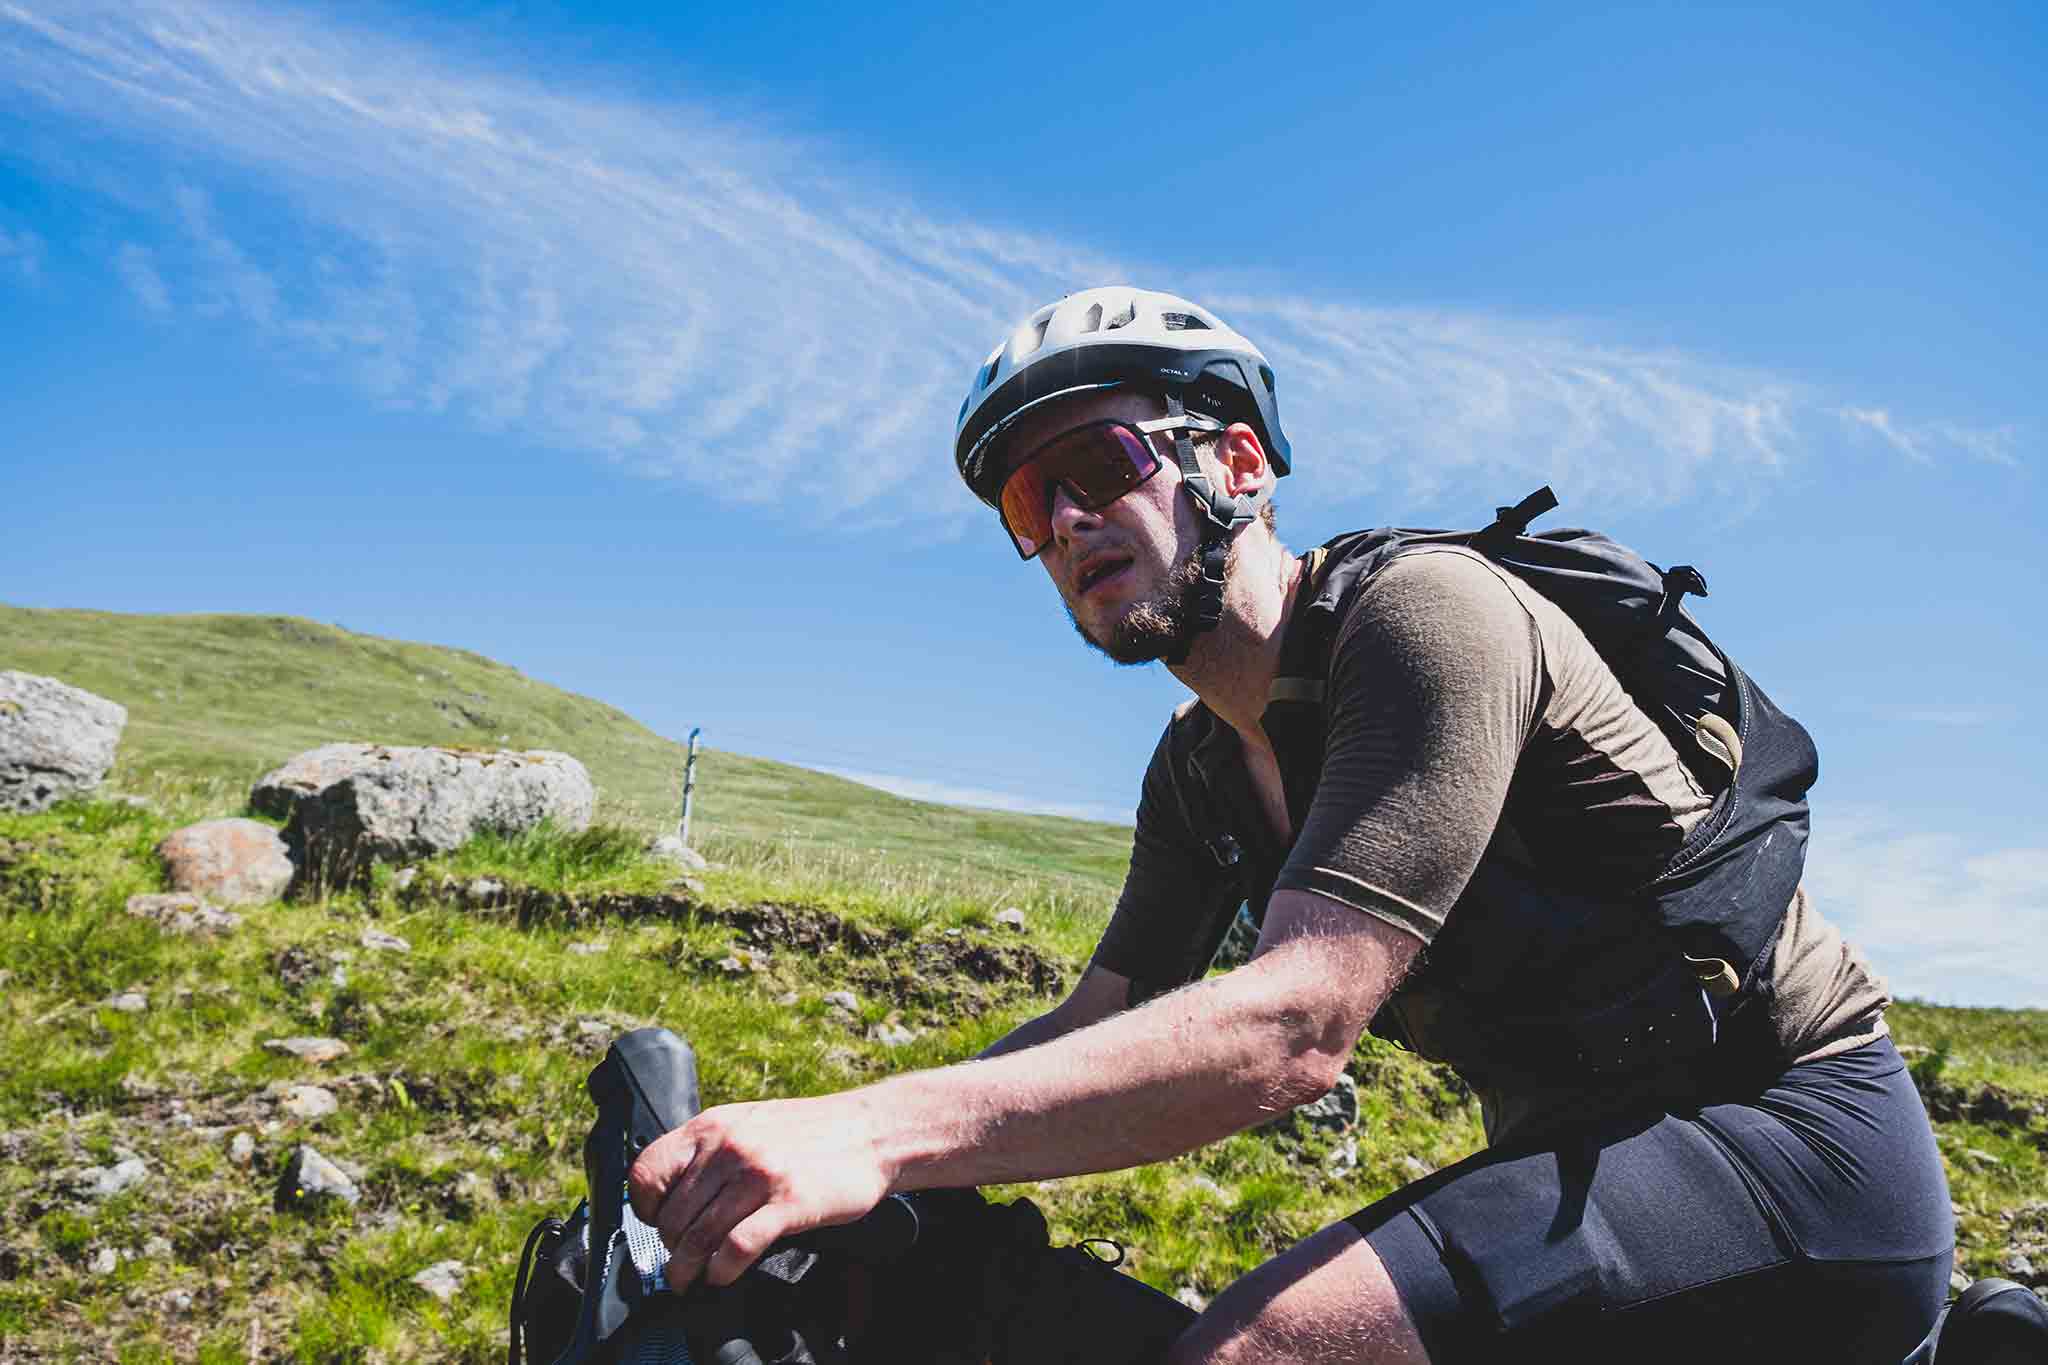 Marcus Nicolson is an adventure cyclist based in Glasgow, Scotland. He has just broken the Fastest Known Time for the Badger Divide, wearing QUOC's Gran Tourer Grave Cycling Shoe. 